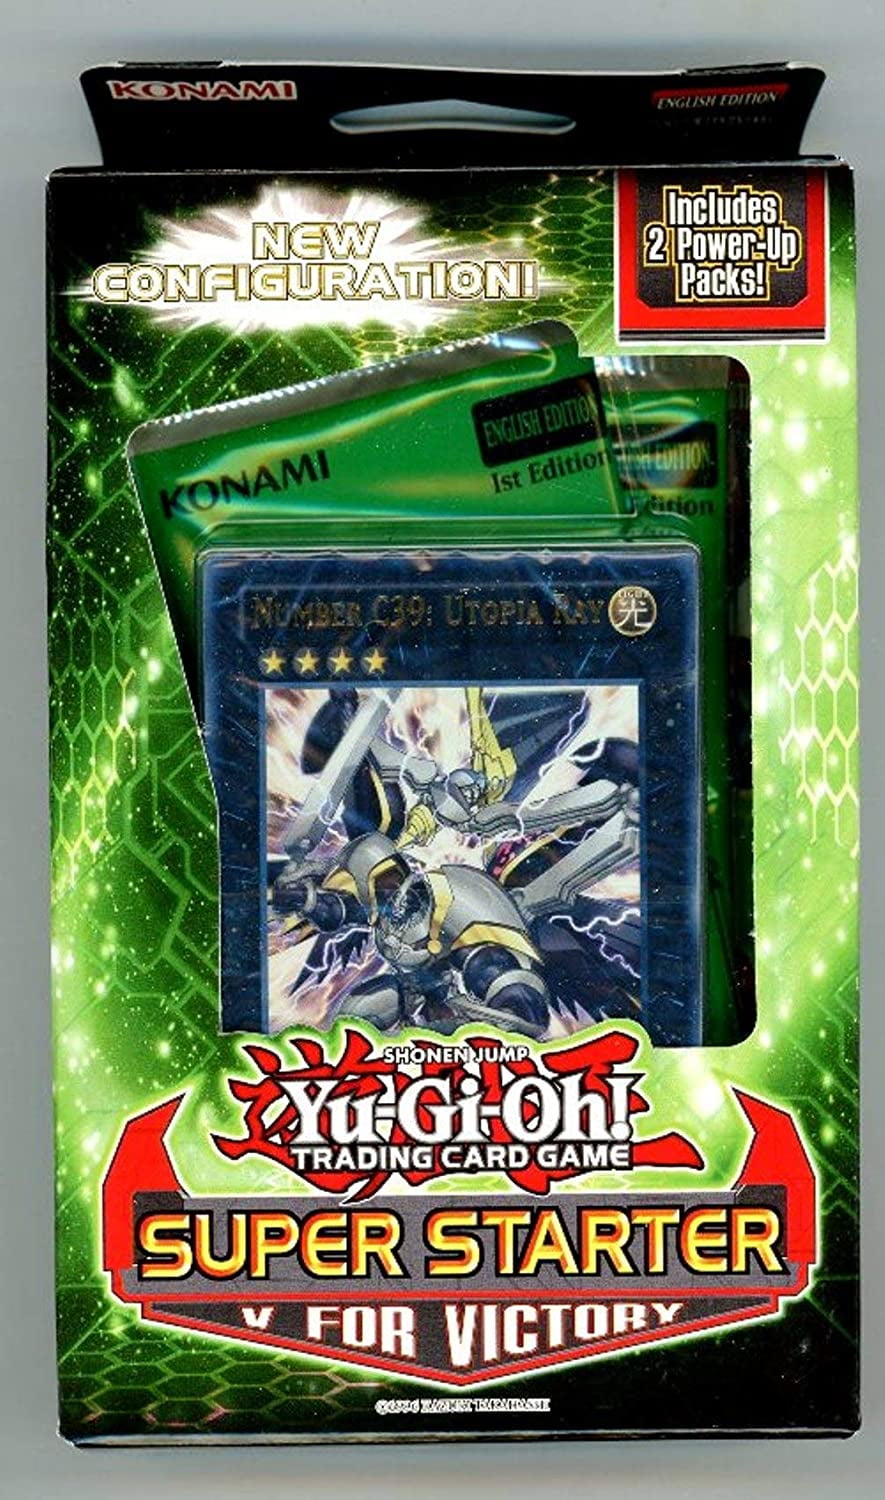 1800 YuGiOh!/Cardfight Vanguard Soft Clear Card Sleeves 2 13/32 x 3 15/32 61x88 mm Great for Dealers!!! 